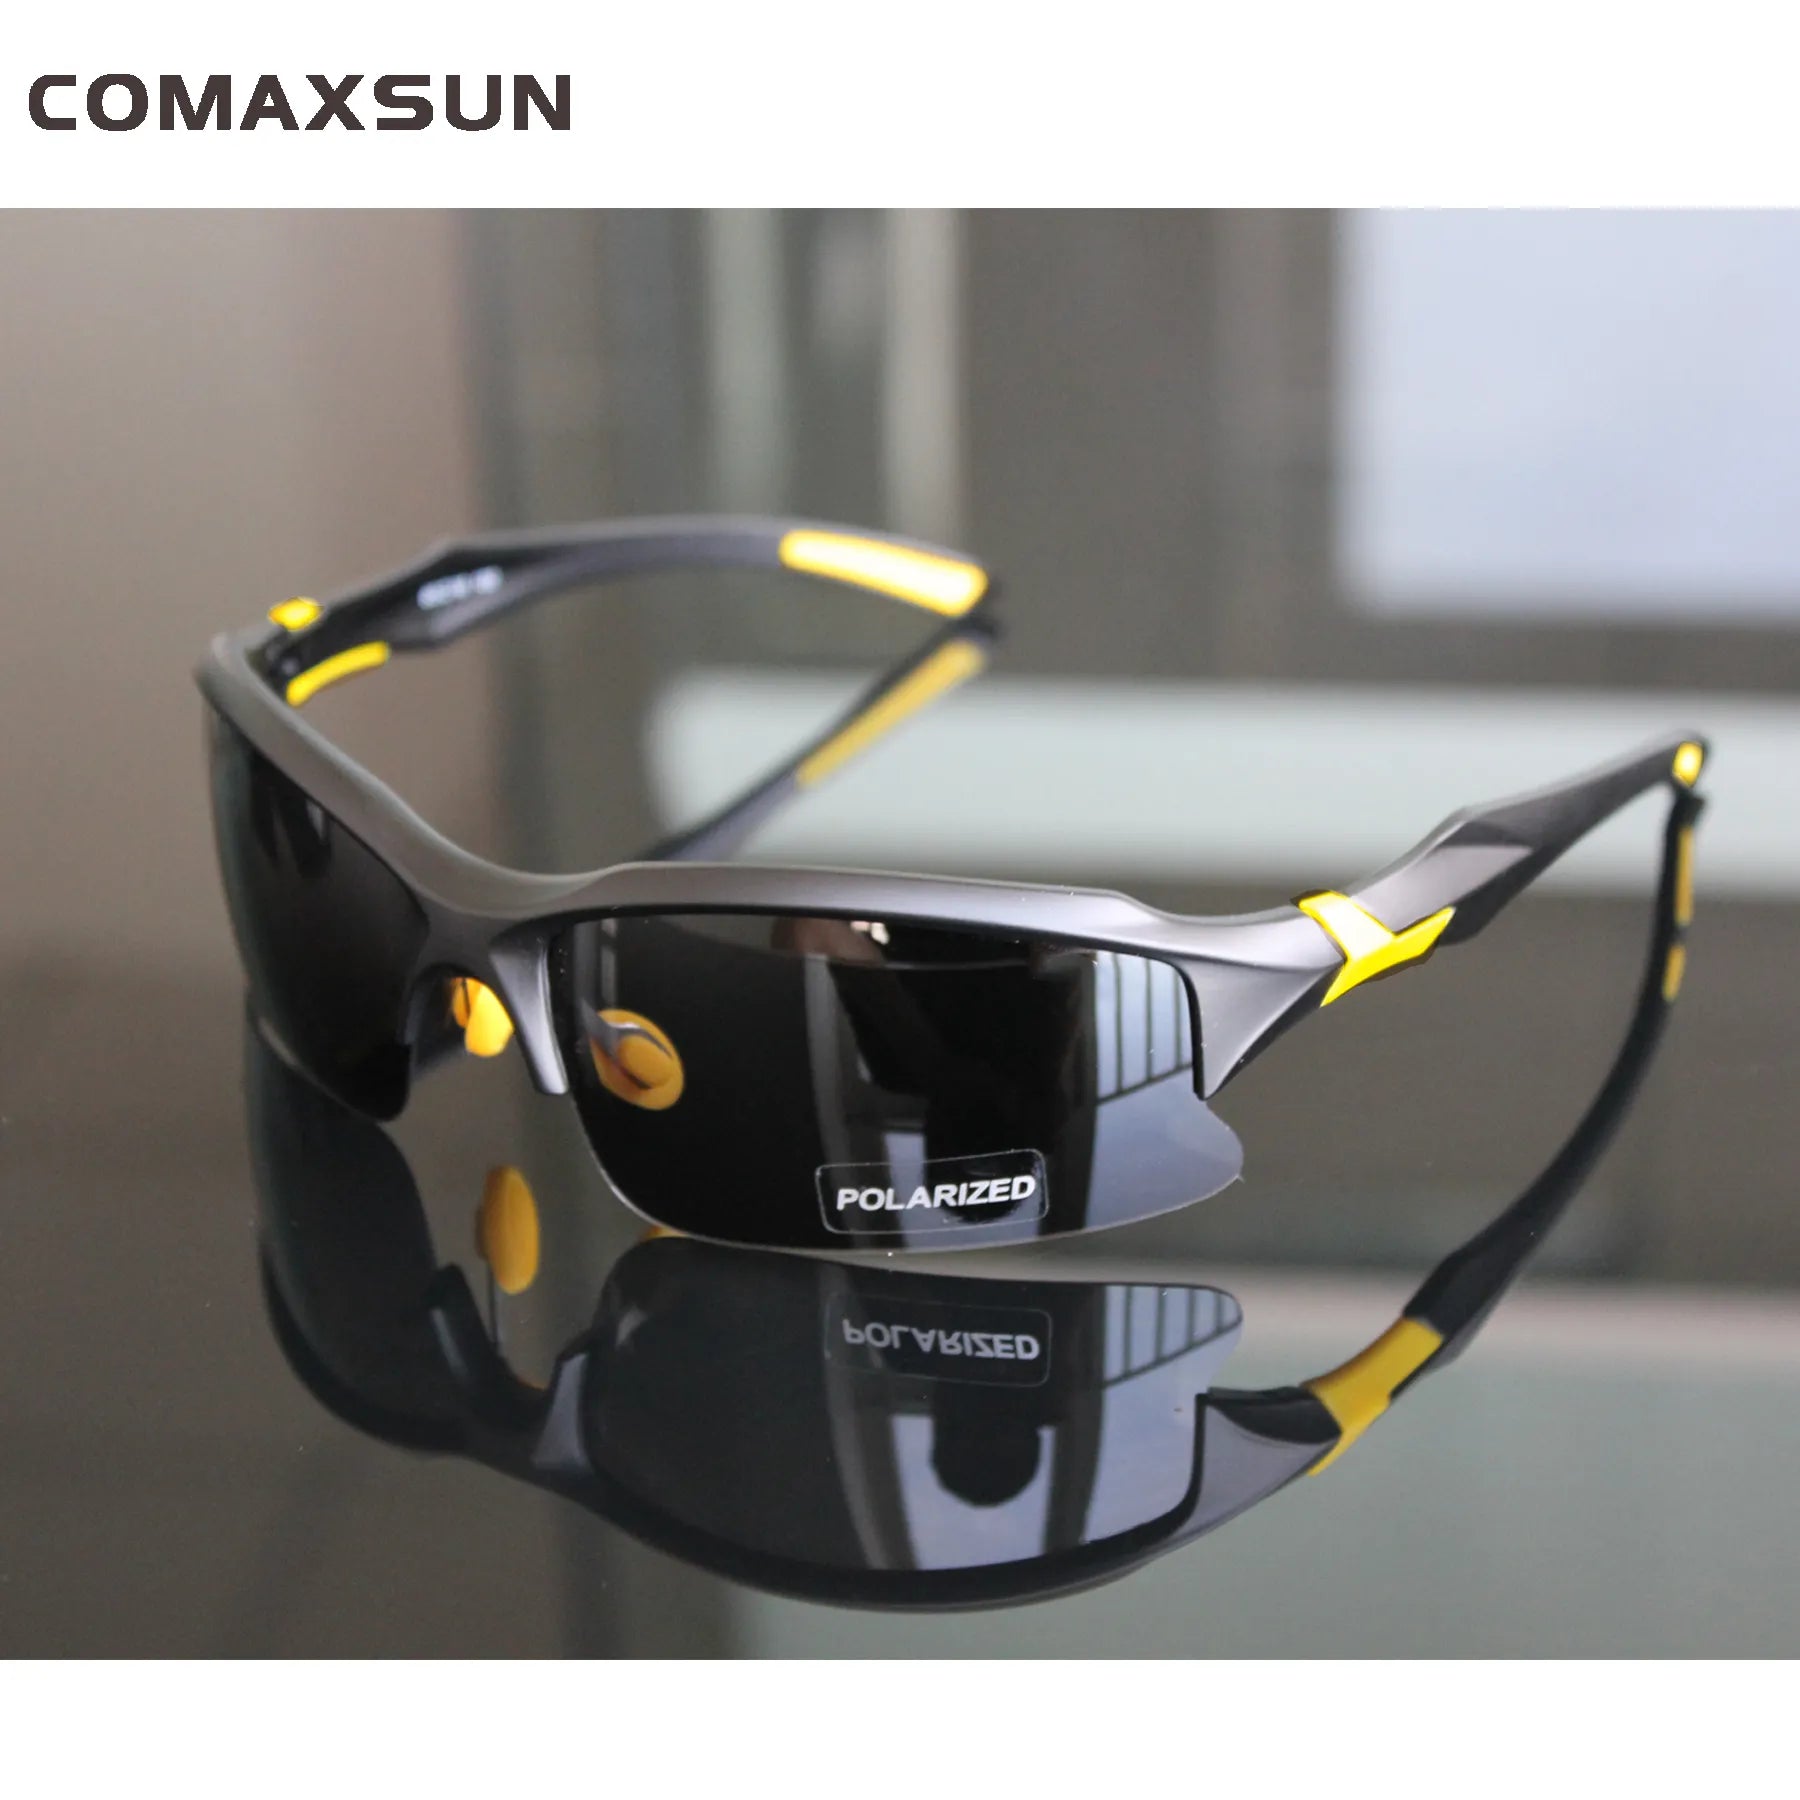 COMAXSUN Professional Polarized Cycling Glasses Bike Bicycle Goggles Outdoor Sports Sunglasses UV 400 2 Style - Sports Accessory